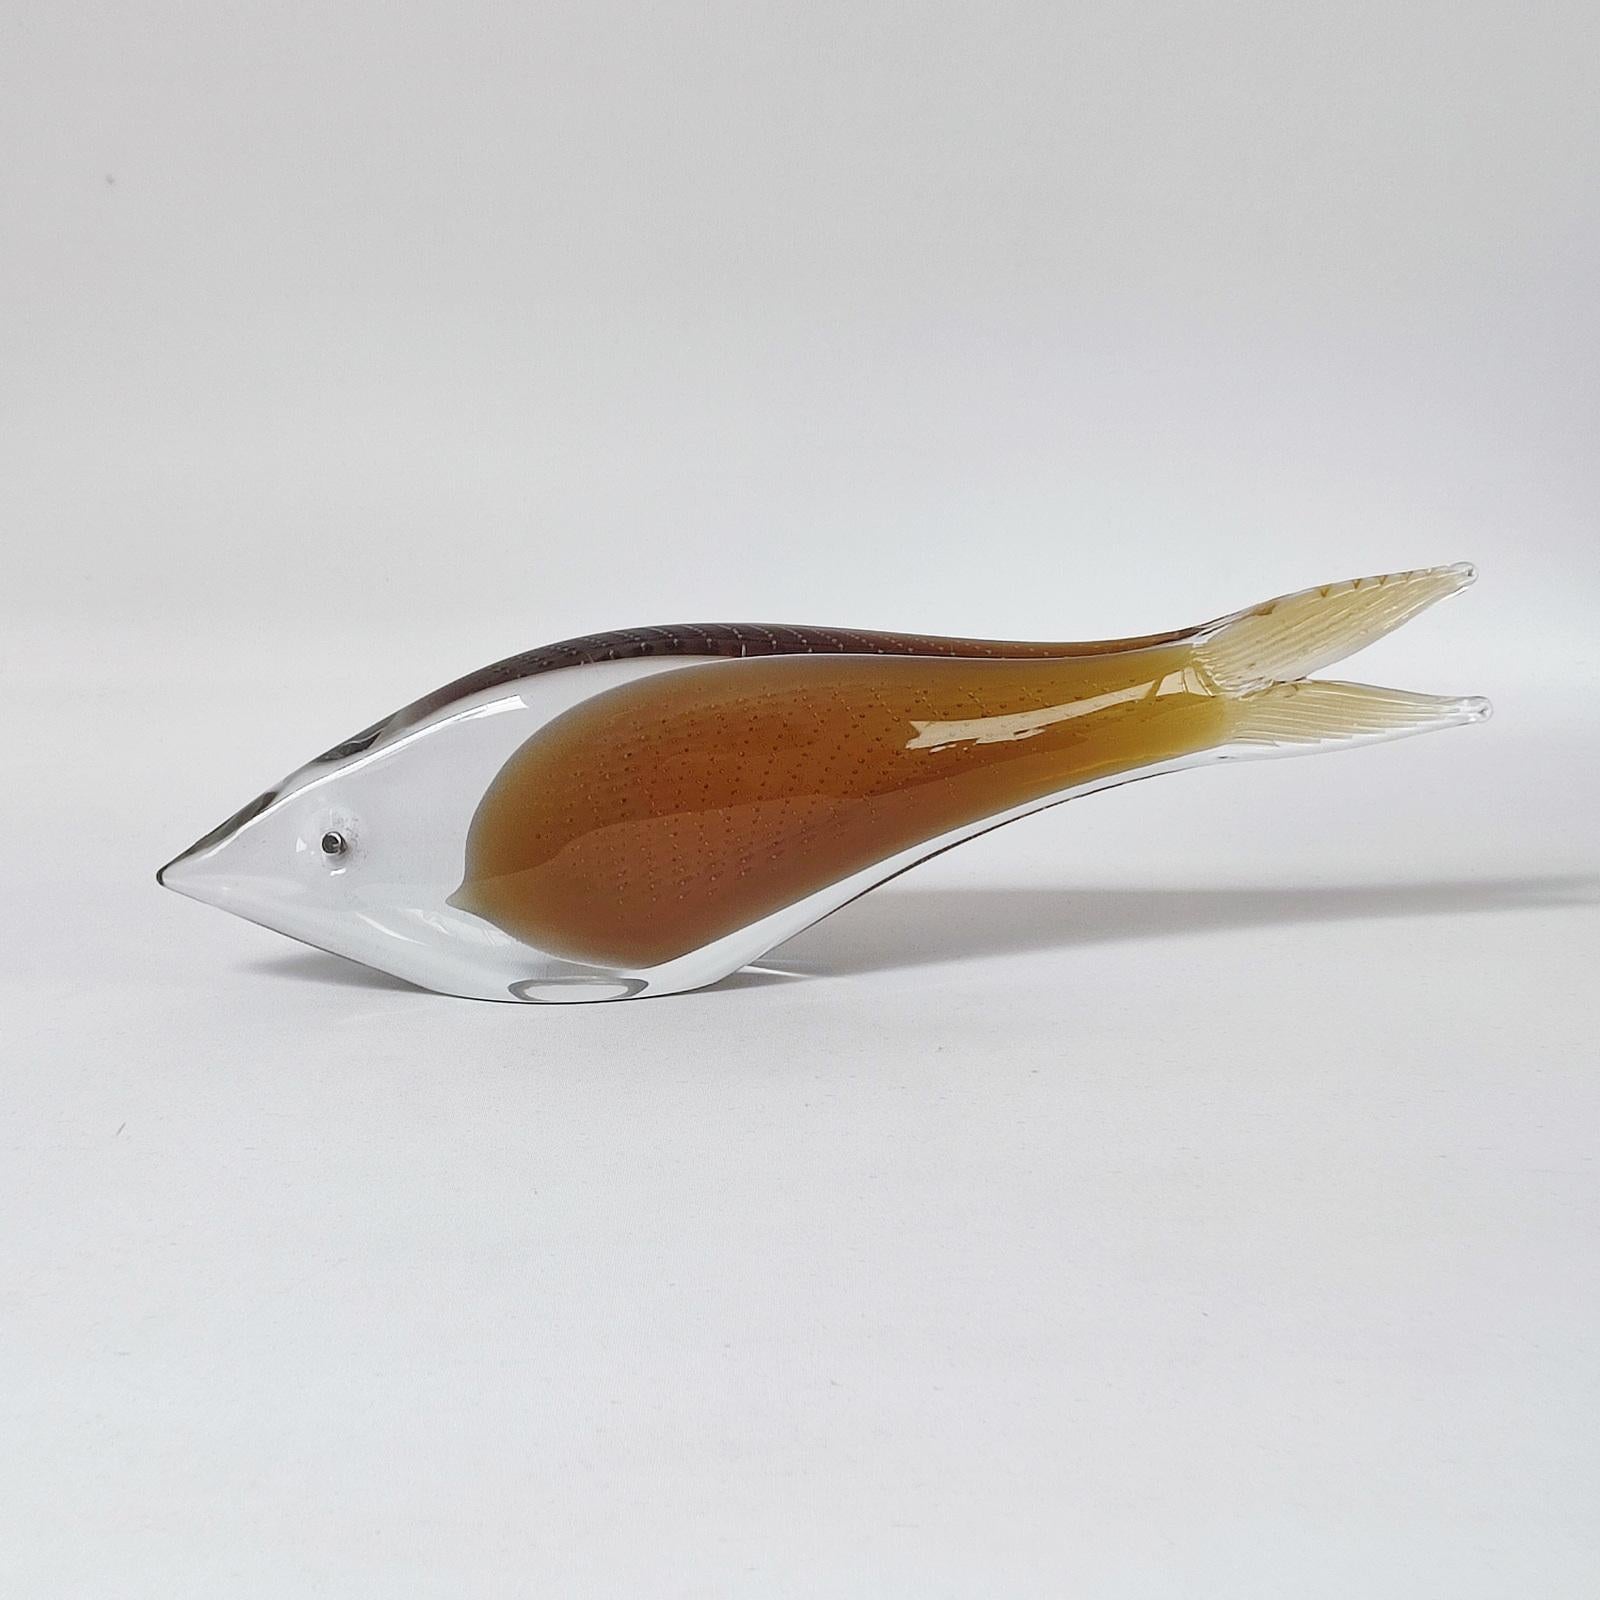 Vintage Rare FM Konstglas Ronneby amber fish 32cm long of the 1960s
A beautiful and rare example of a fish glass figurine from the Swedish FM Konstglas company, made in the controlled bubble and sommerso technique. The Marcolin brothers designed it